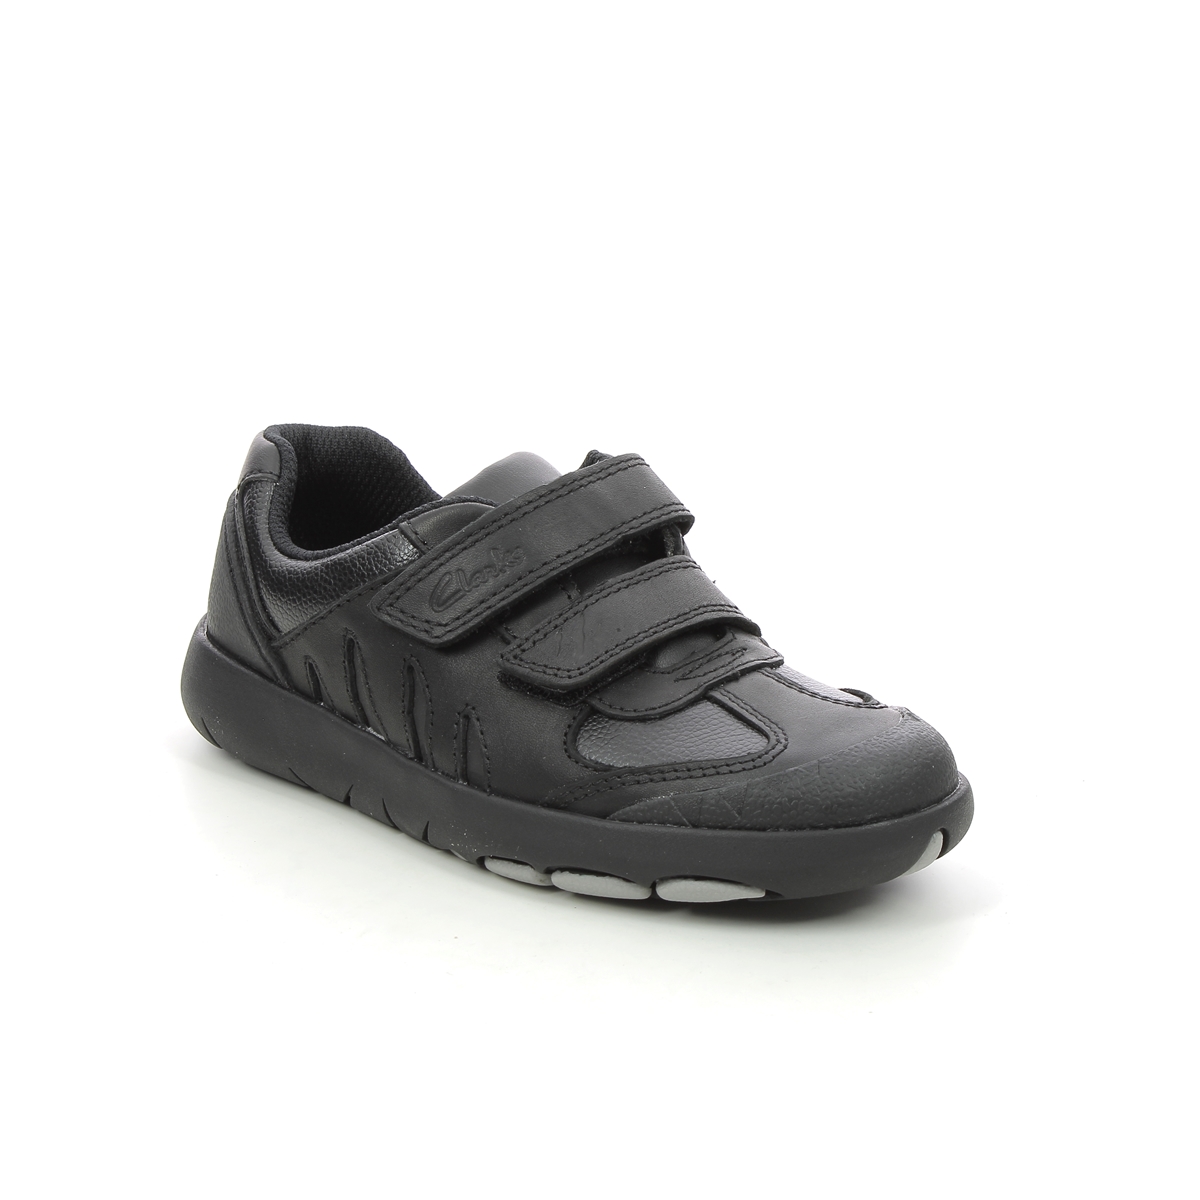 Clarks Rex Stride K Black Leather Kids Boys Shoes 626987G In Size 2 In Plain Black Leather G Width Fitting For School For kids